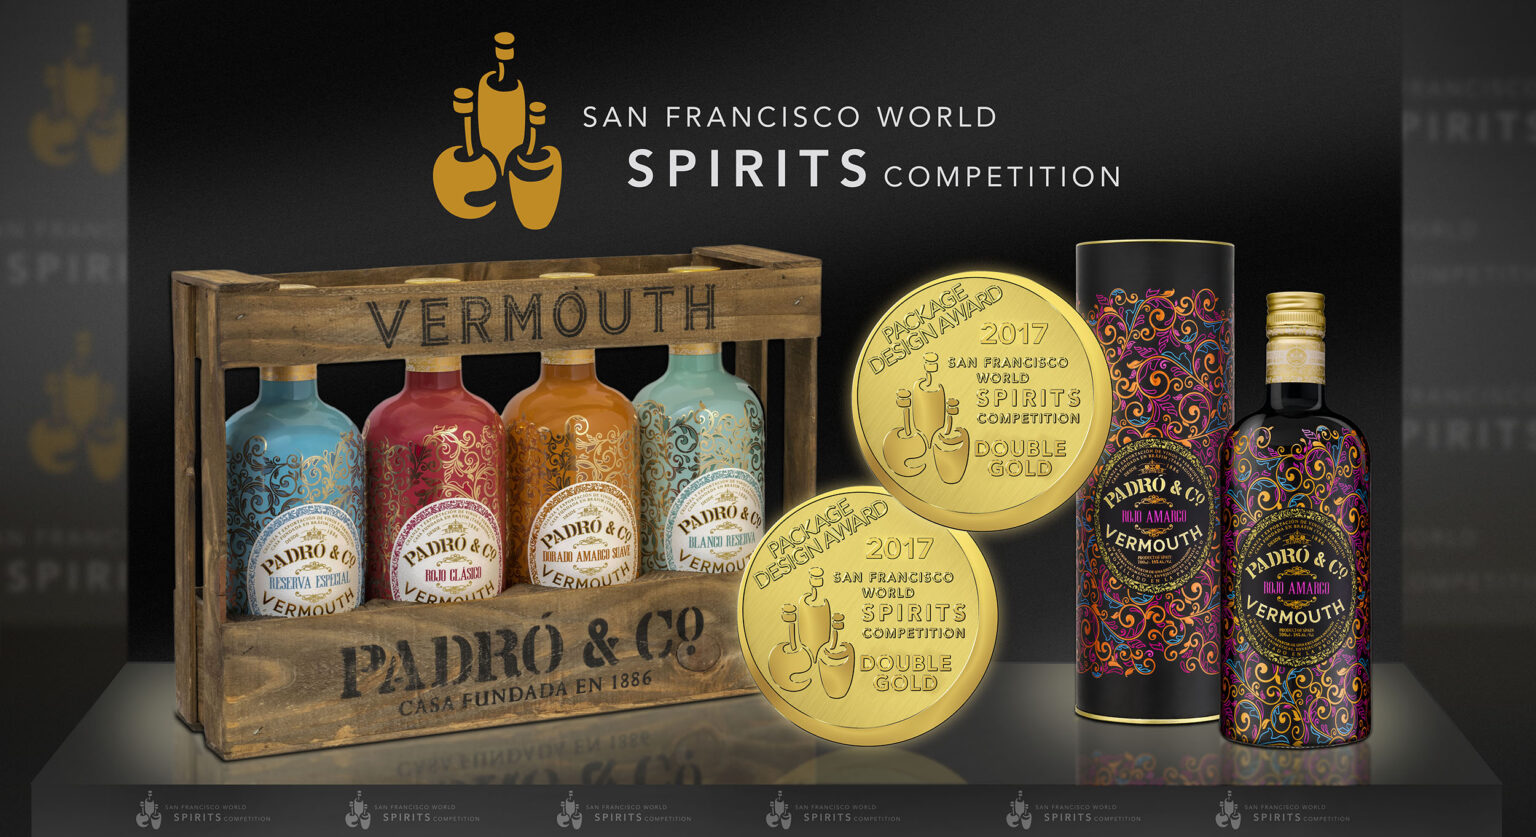 Two Double Gold medals from the San Francisco World Spirits Competition